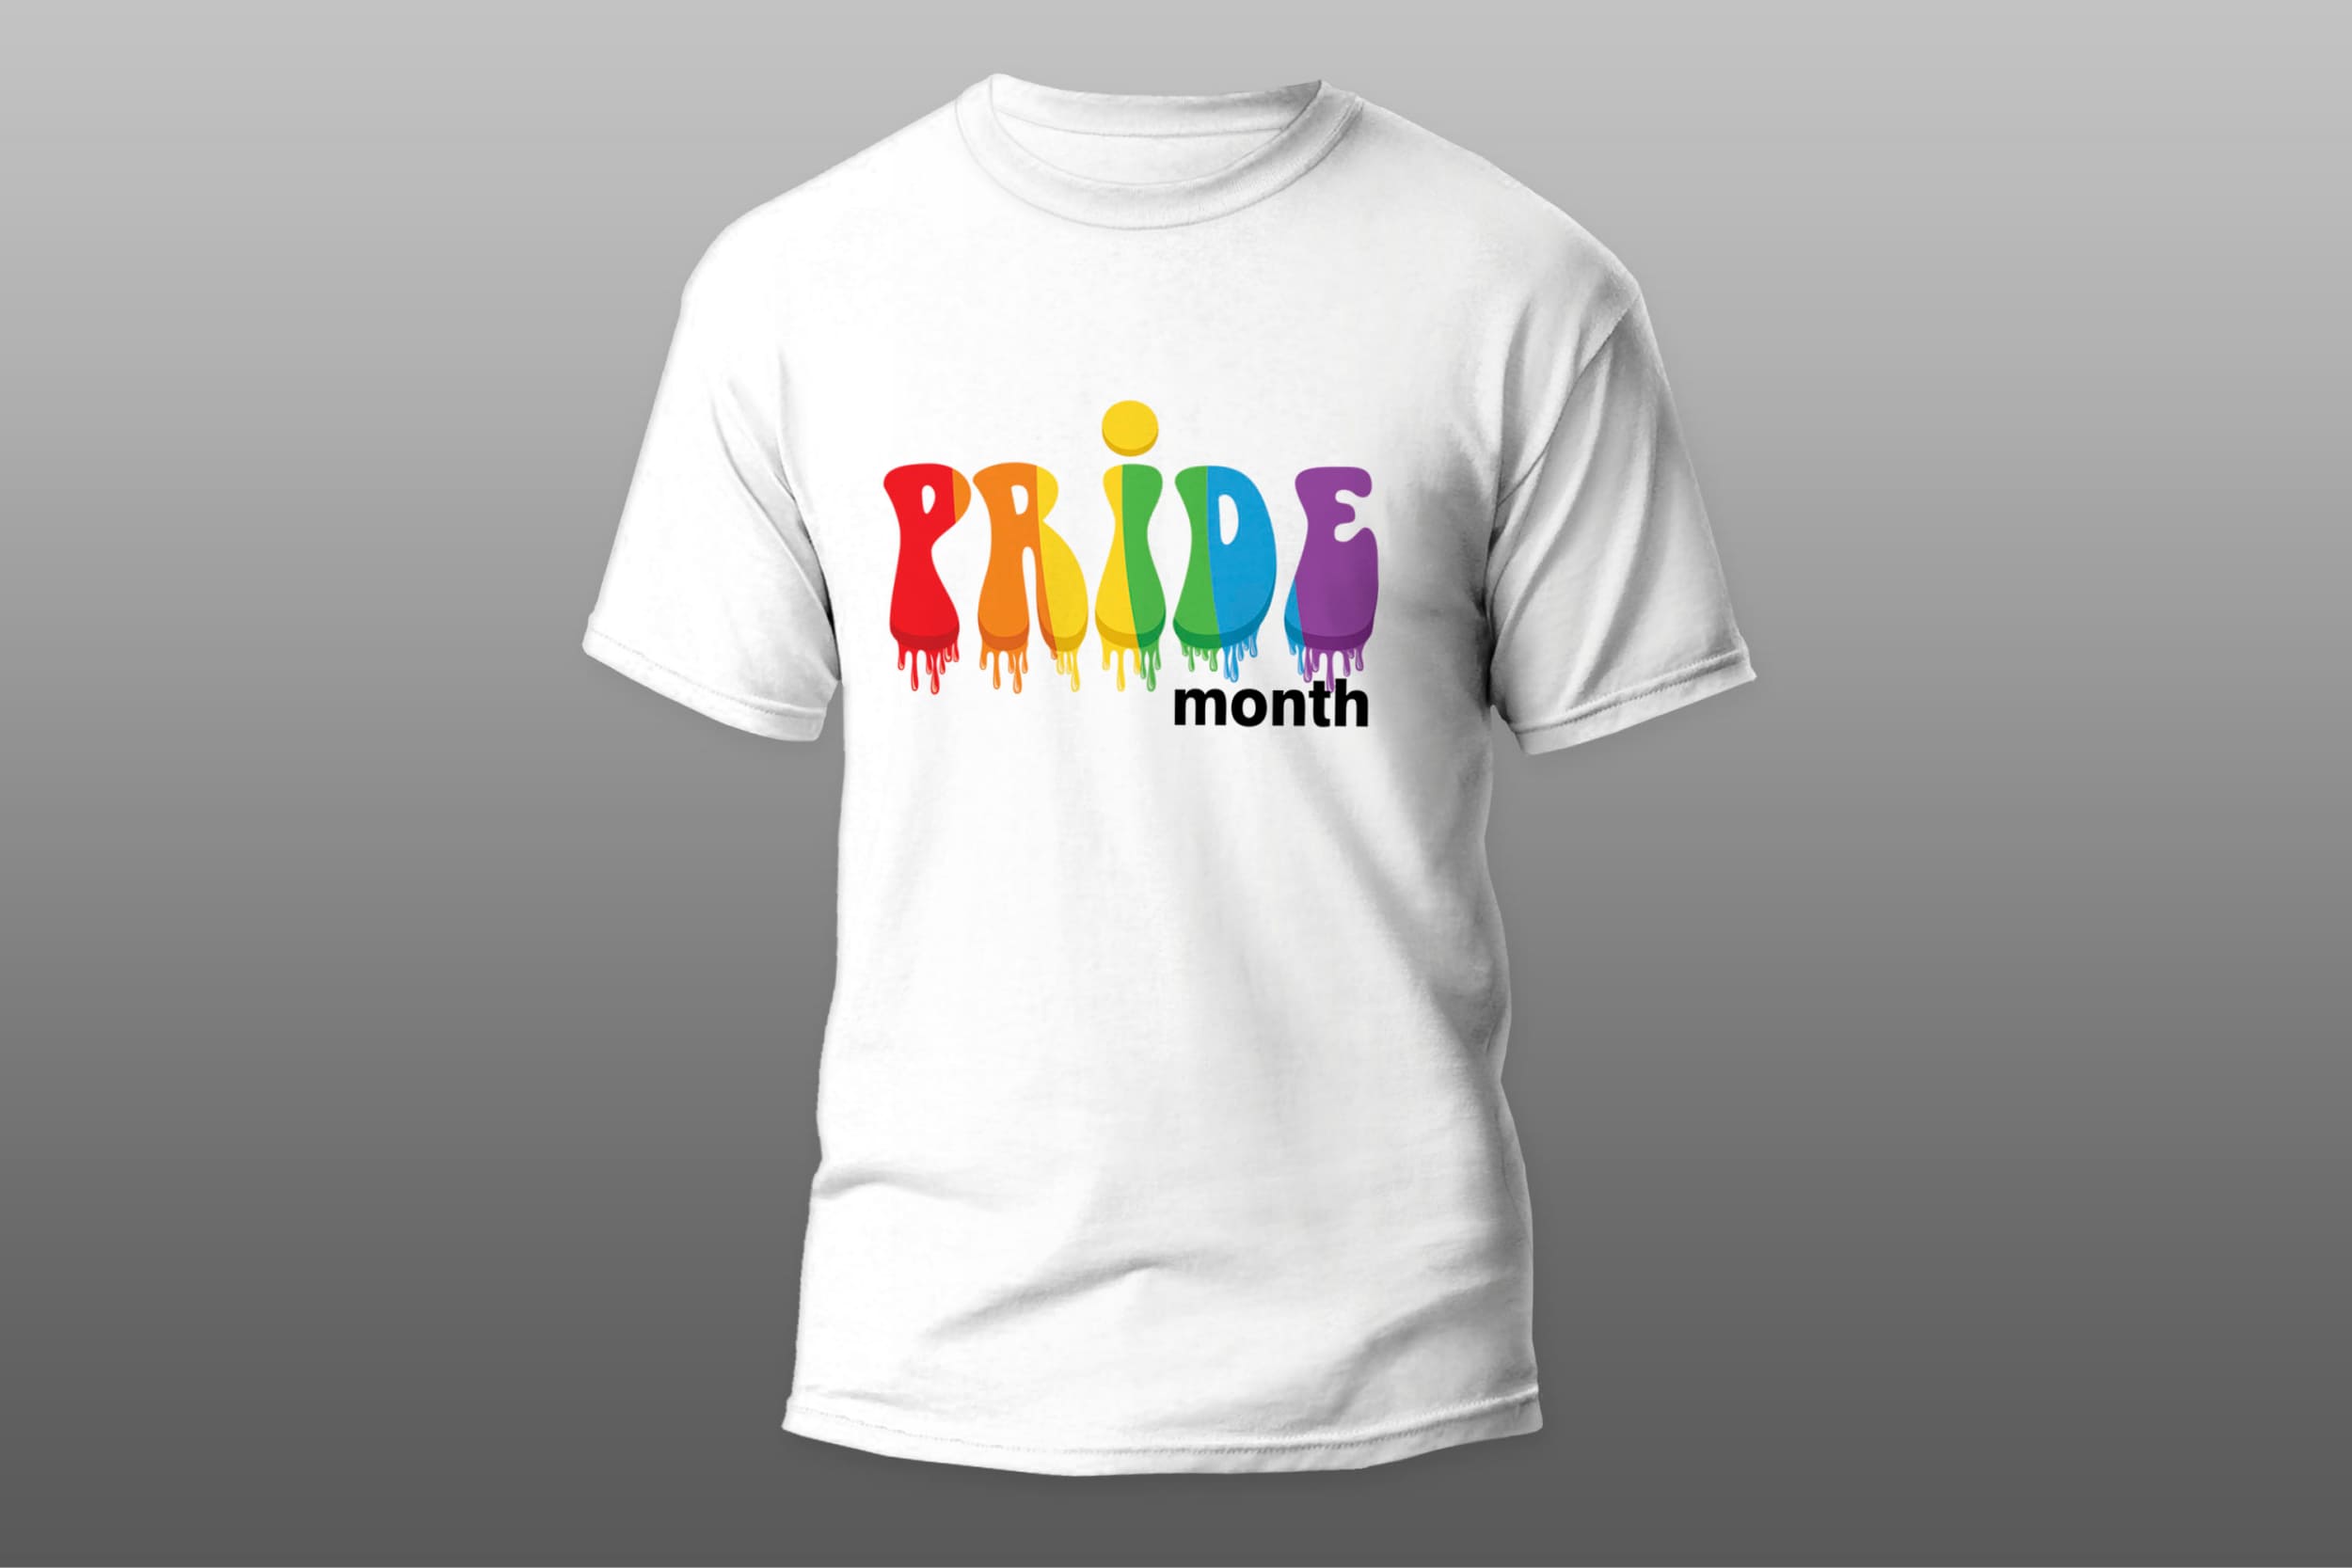 White T-shirt with the lettering "Pride" in the colors of the LGBT flag and the black lettering "month" on a gray background.